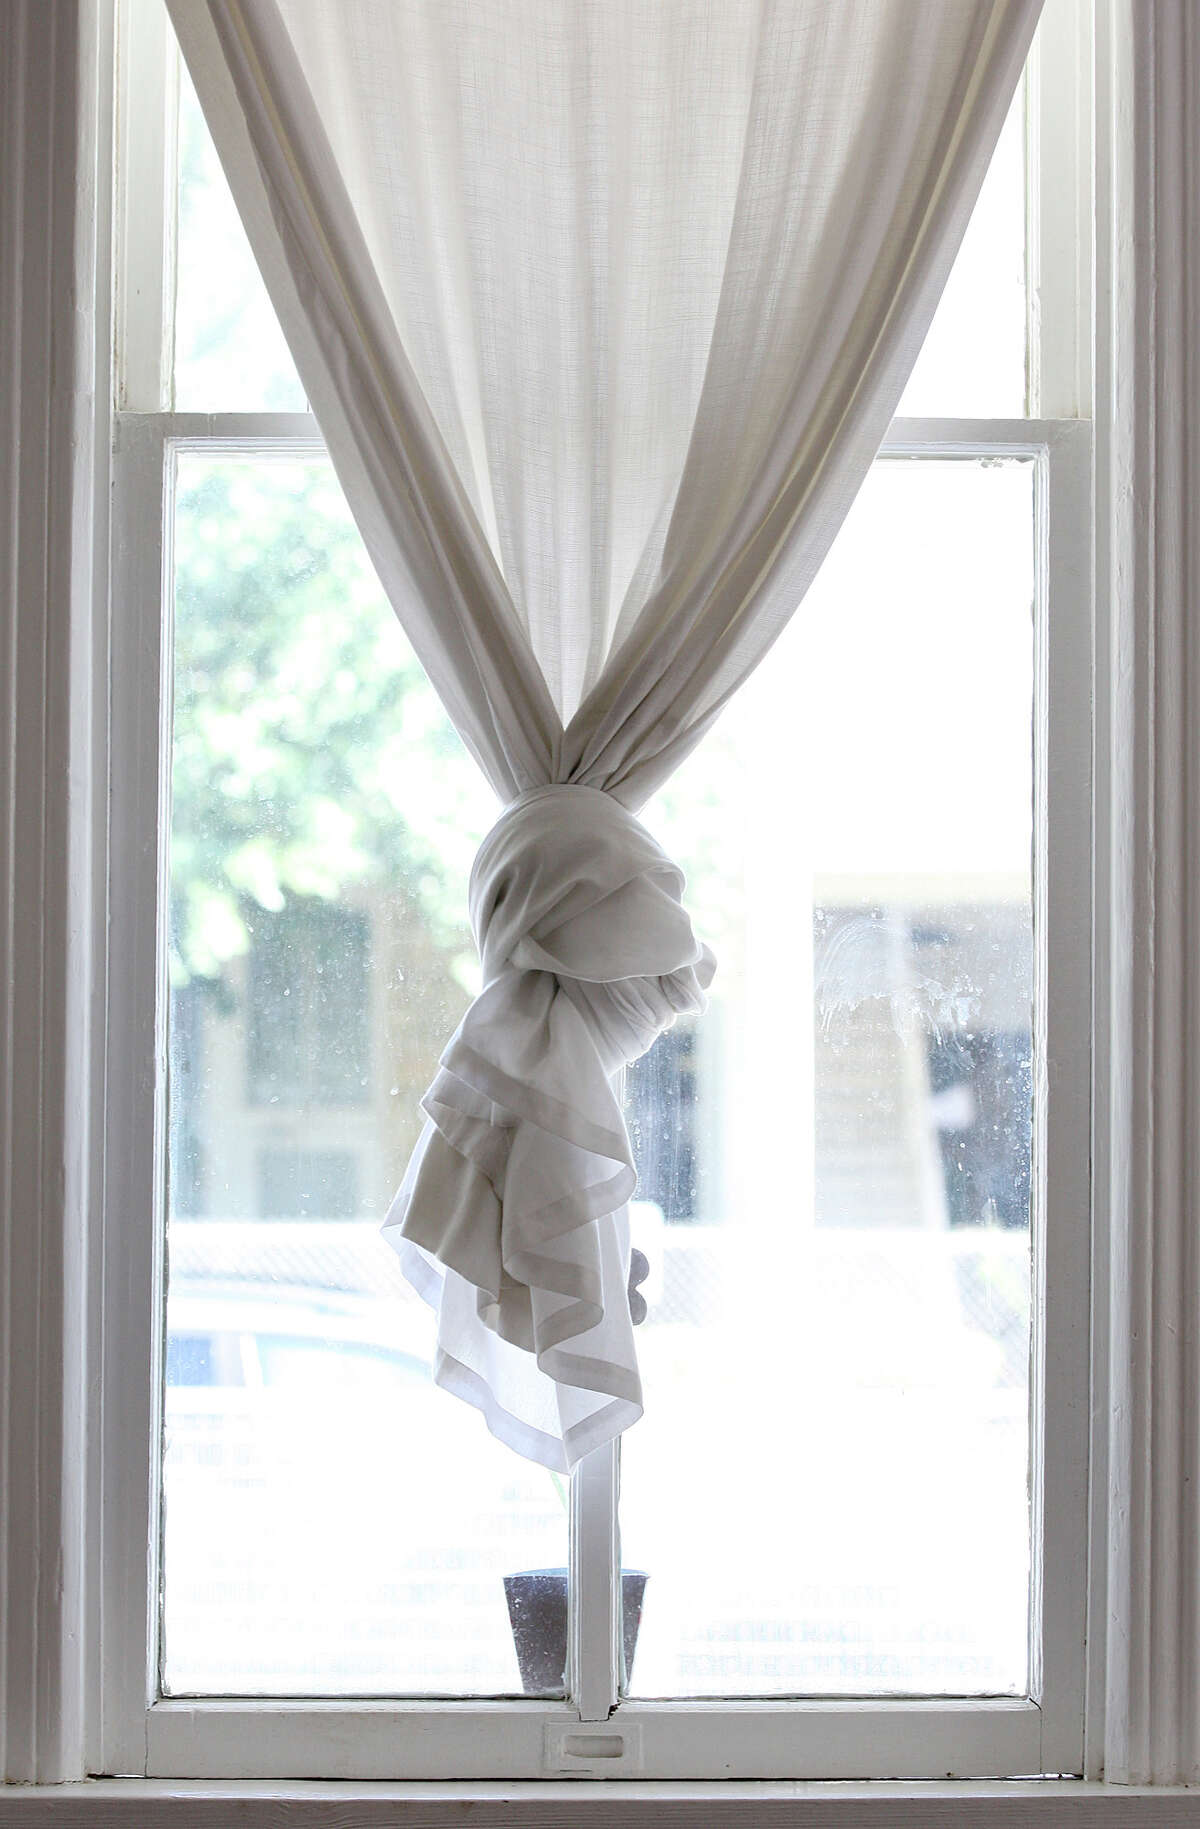 Window treatments are a magnet for dust and allergens. Pull them down and dry clean, or vacuum each thoroughly. Don’t forget to vacuum blinds and windowsills as well. Tempted to open the windows to let the spring breeze in? Don’t. Unwanted pollen can enter your home and spread everywhere.